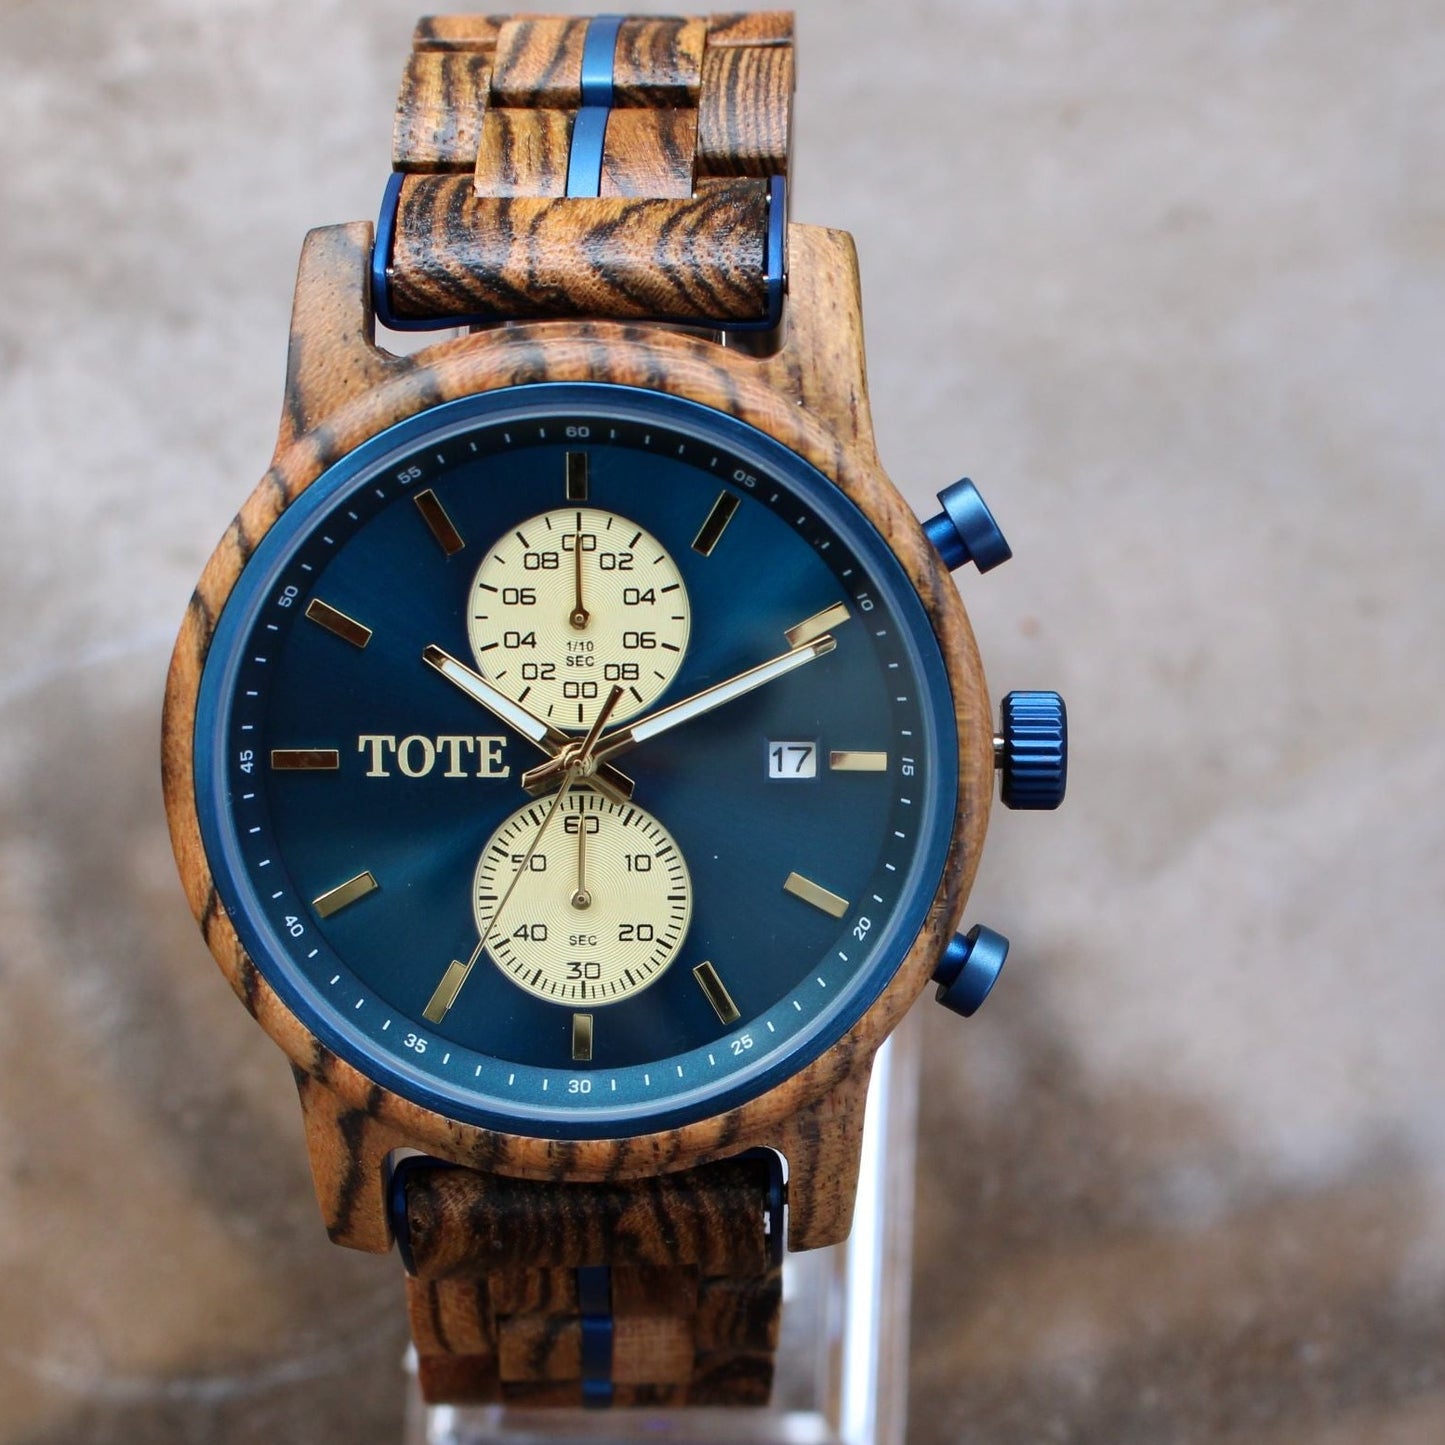 Times of the Essence (TOTE) wood watch Allure.